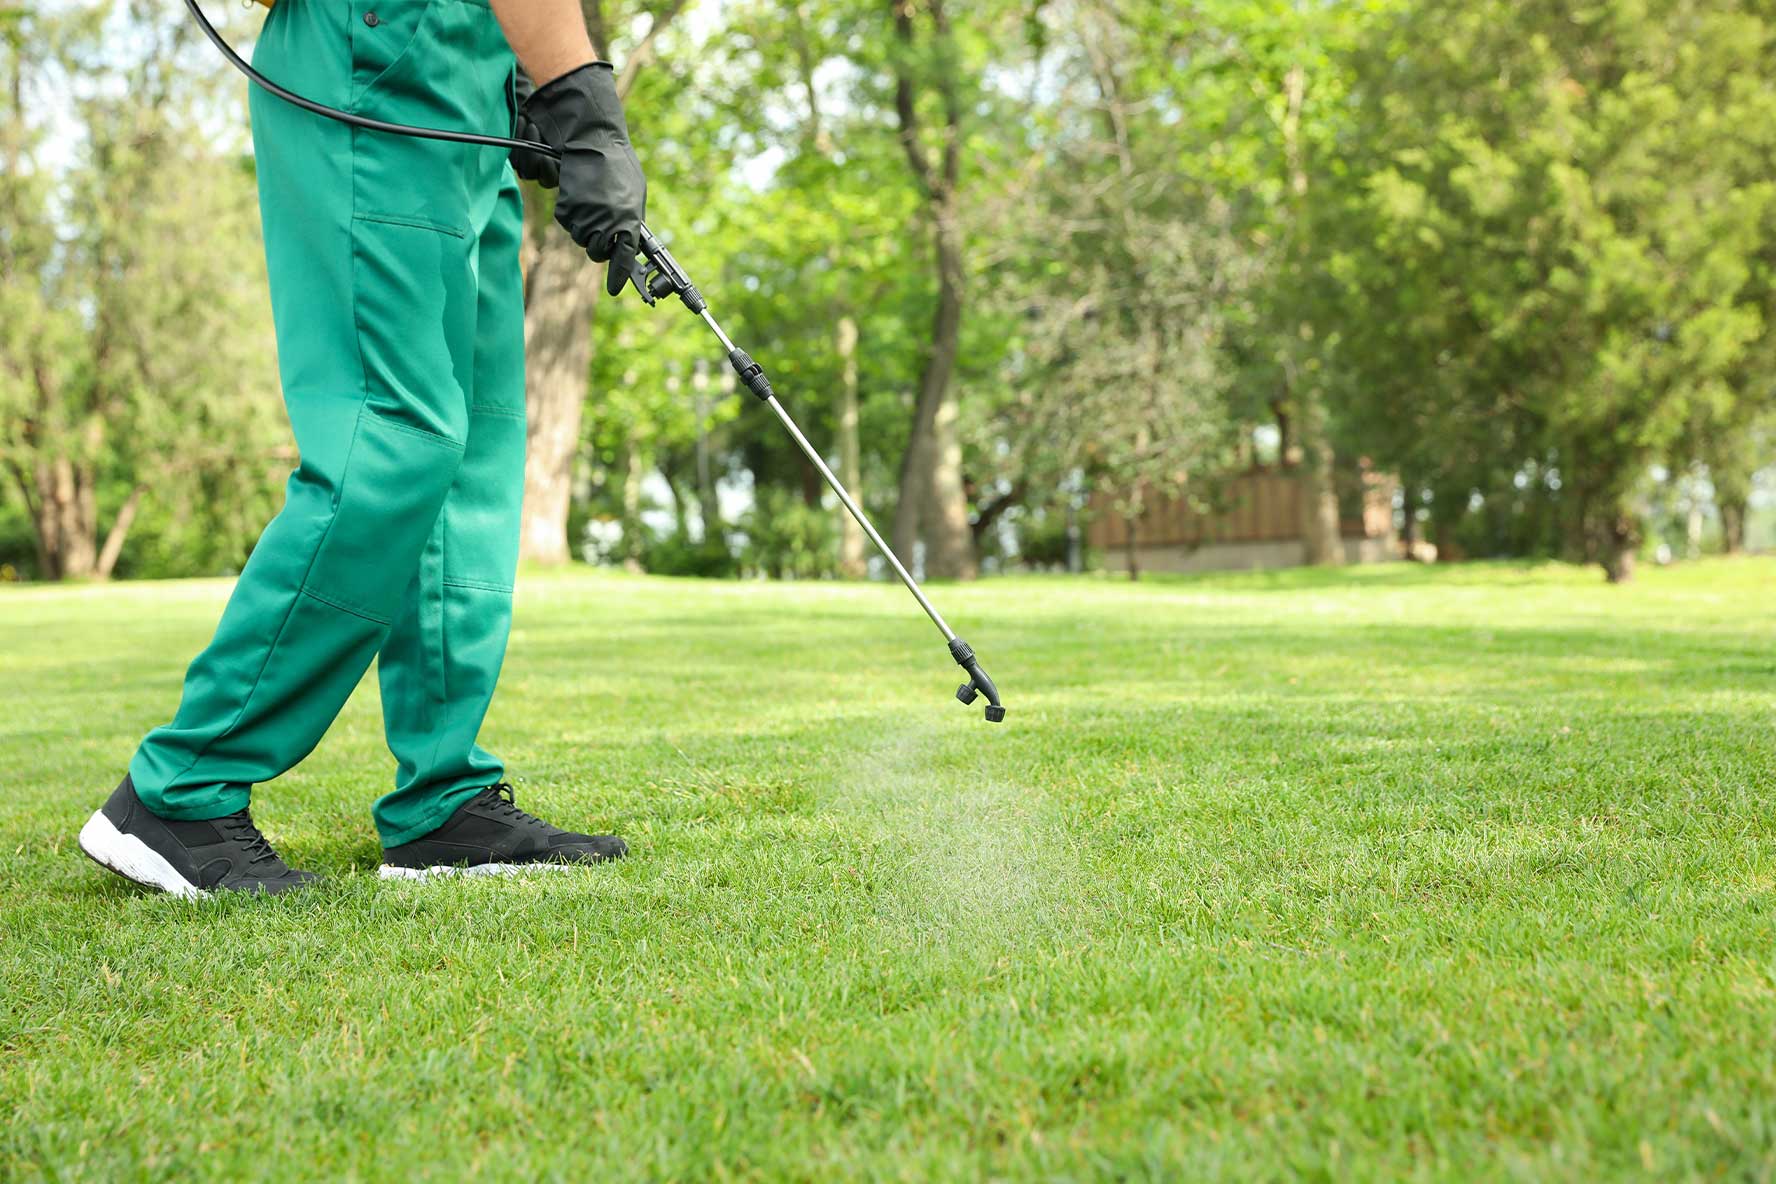 How Much Is The Tax Rate For Lawn Care